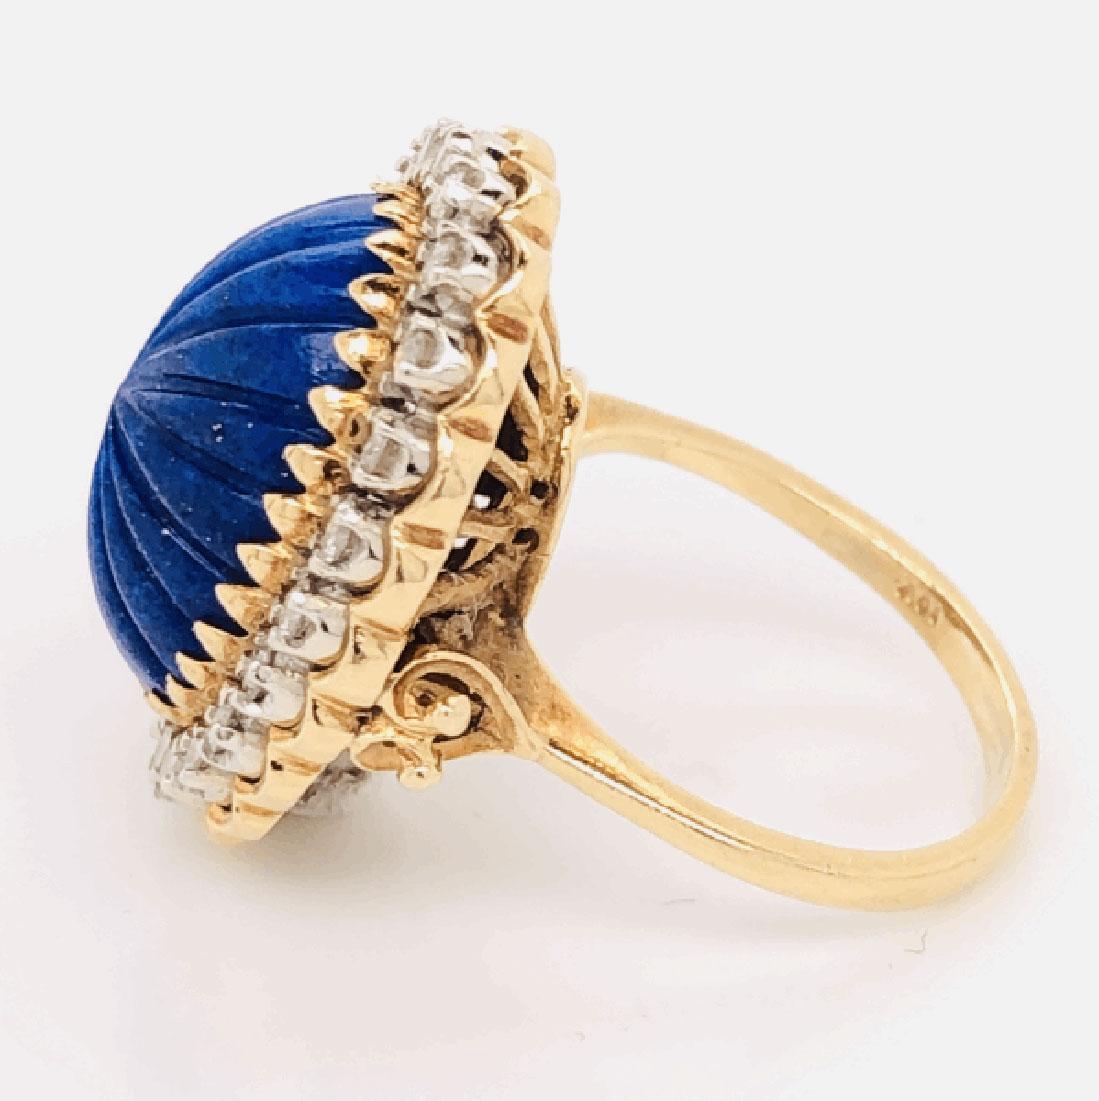 Mixed Cut Carved Lapis Lazuli and Diamond Cocktail 18 Karat Gold Ring Estate Fine Jewelry